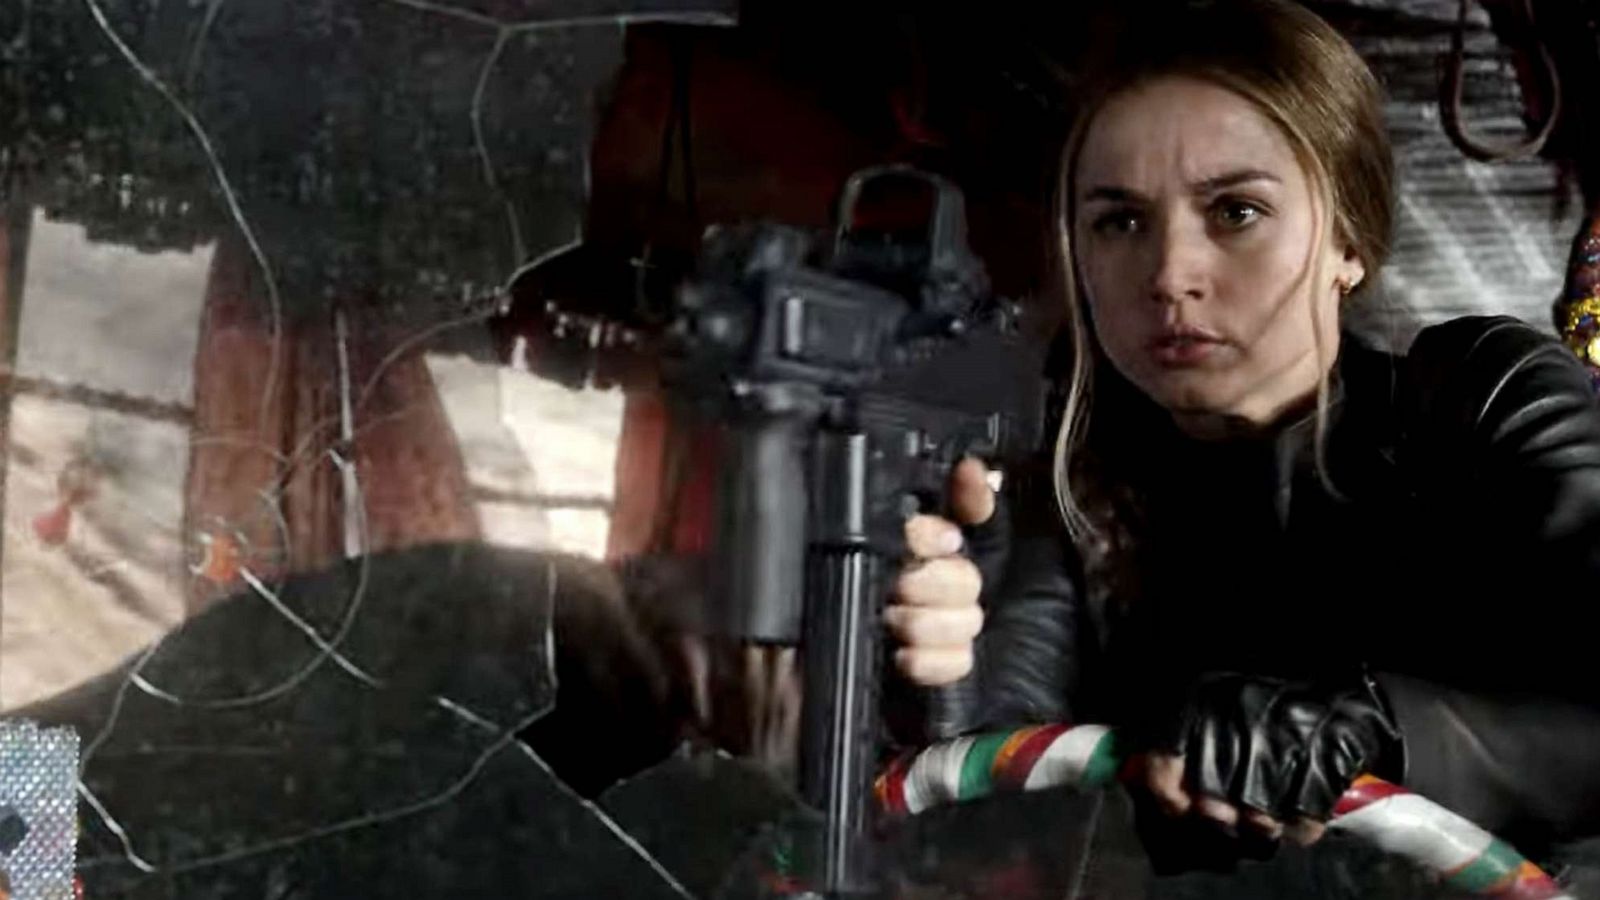 Ghosted review: The fatigue is real in Ana de Armas and Chris